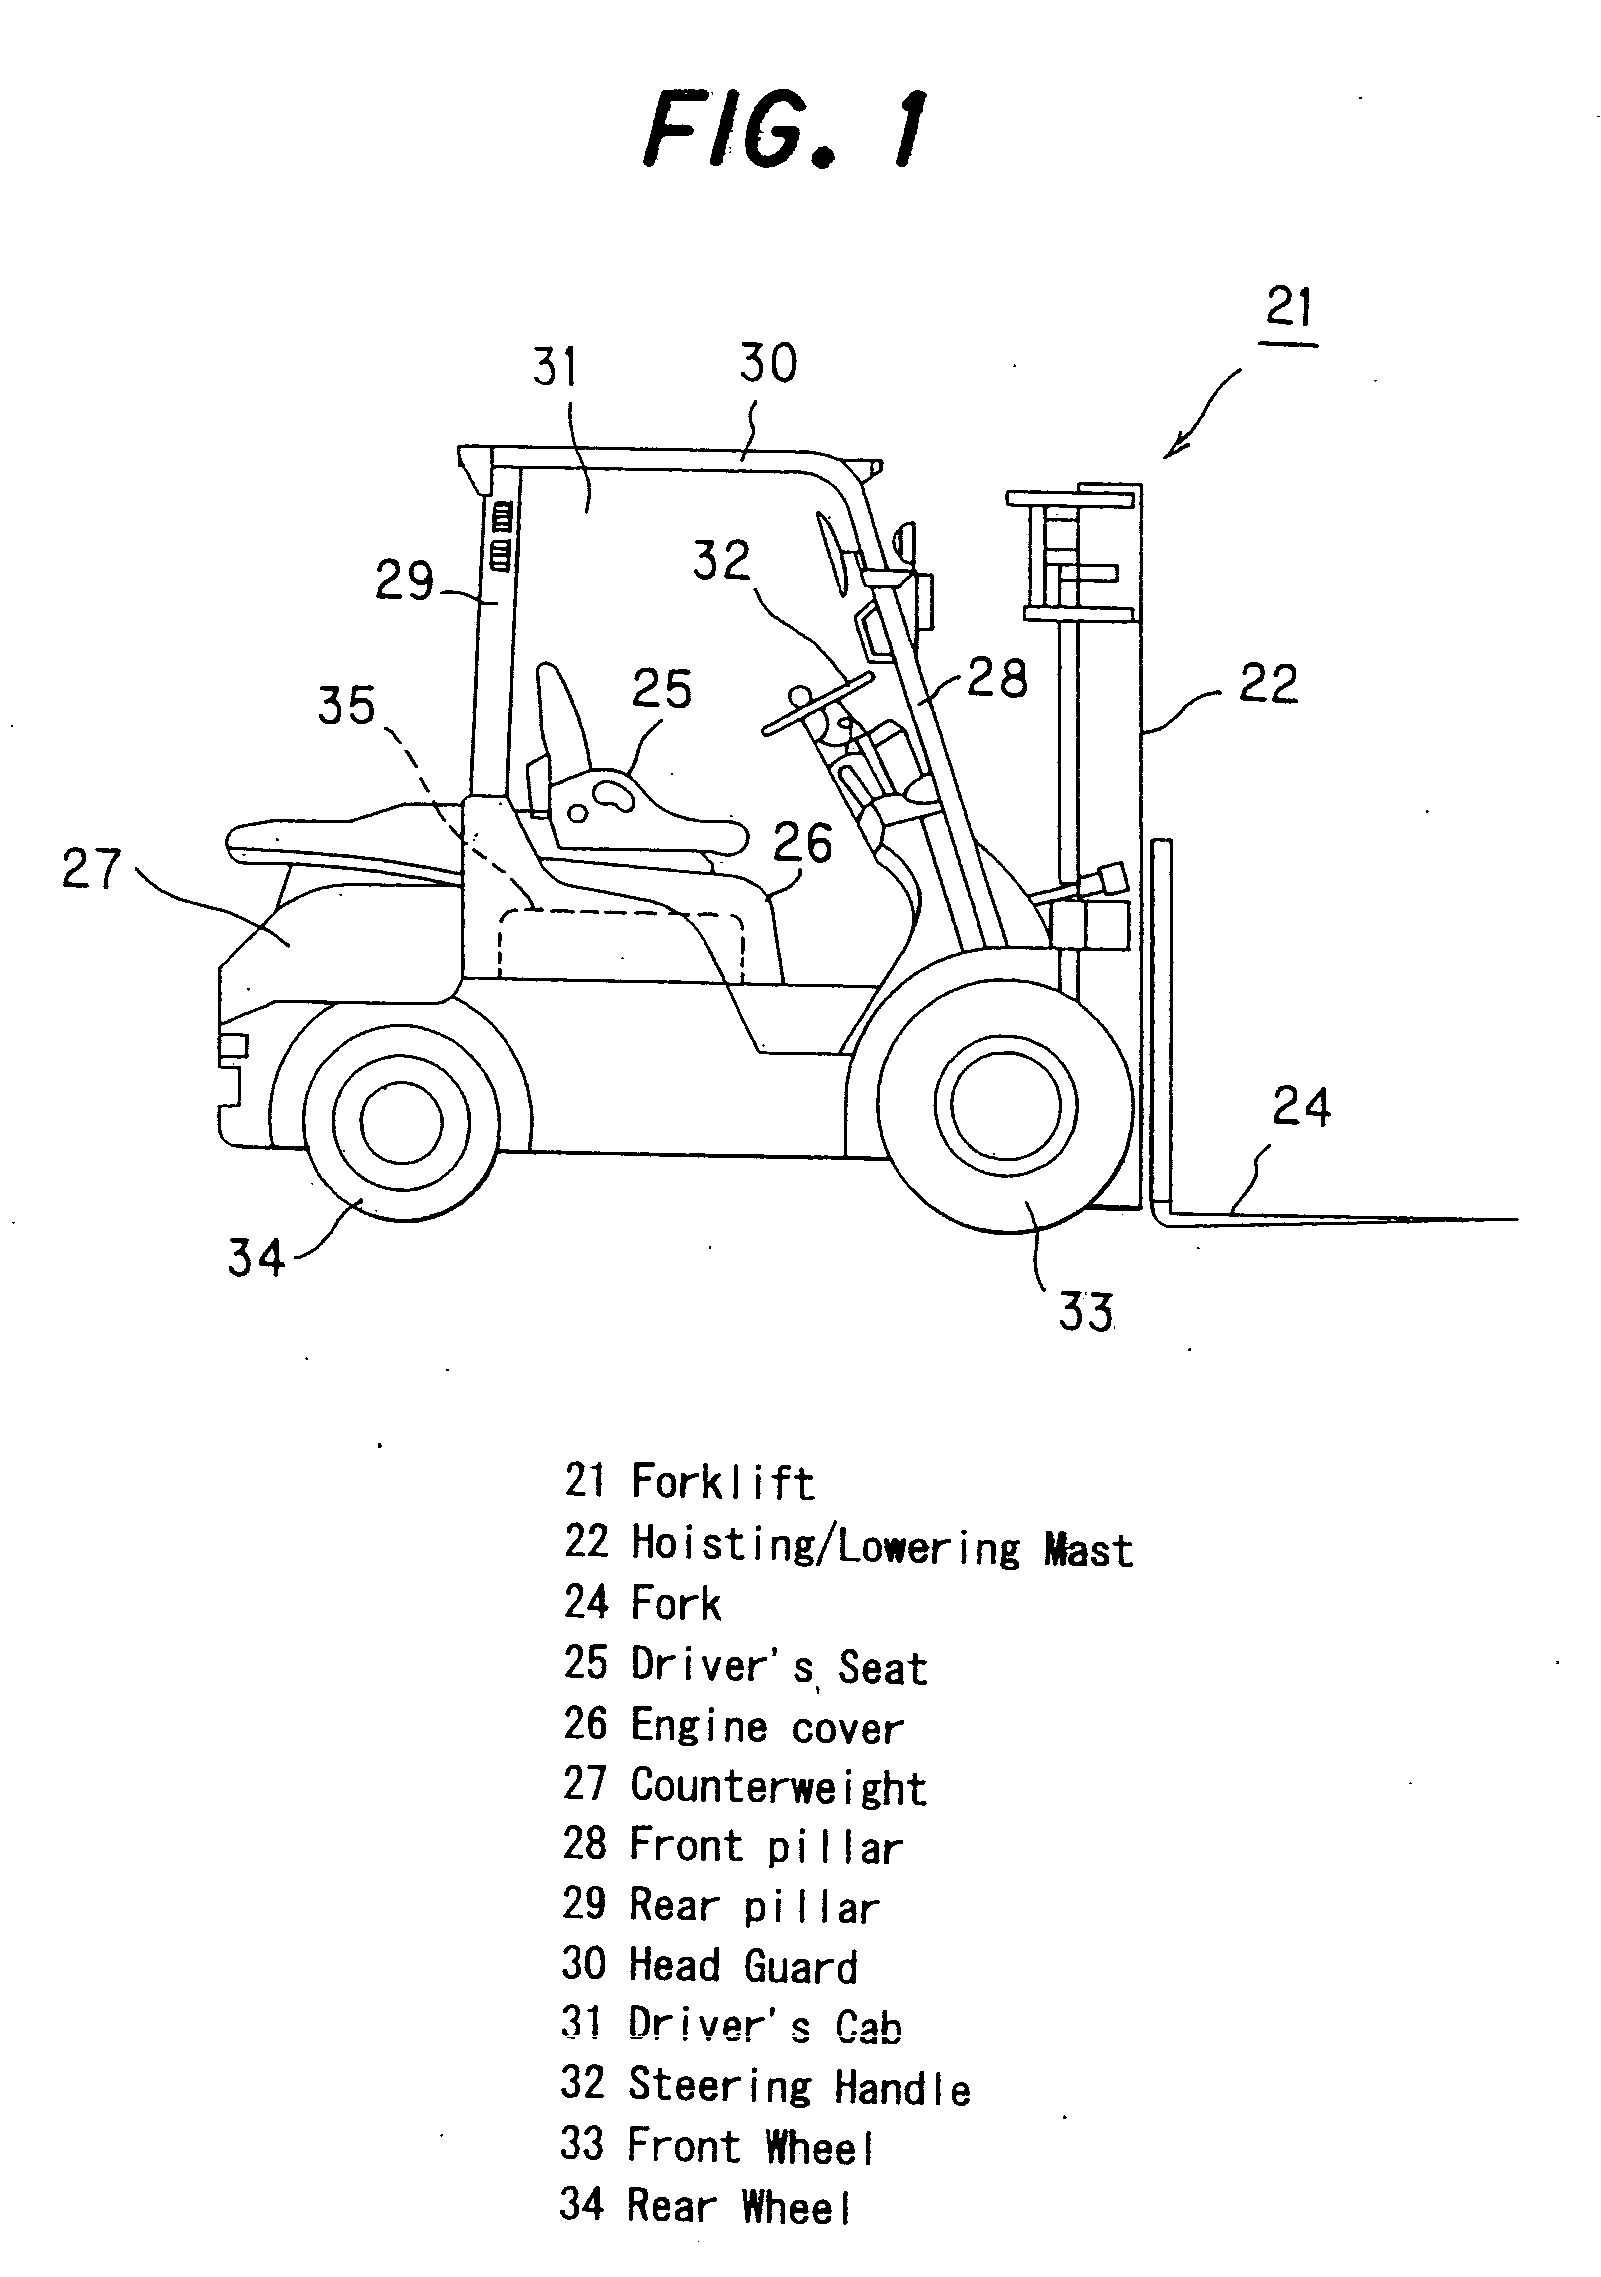 Air intake system and forklift equipped with it